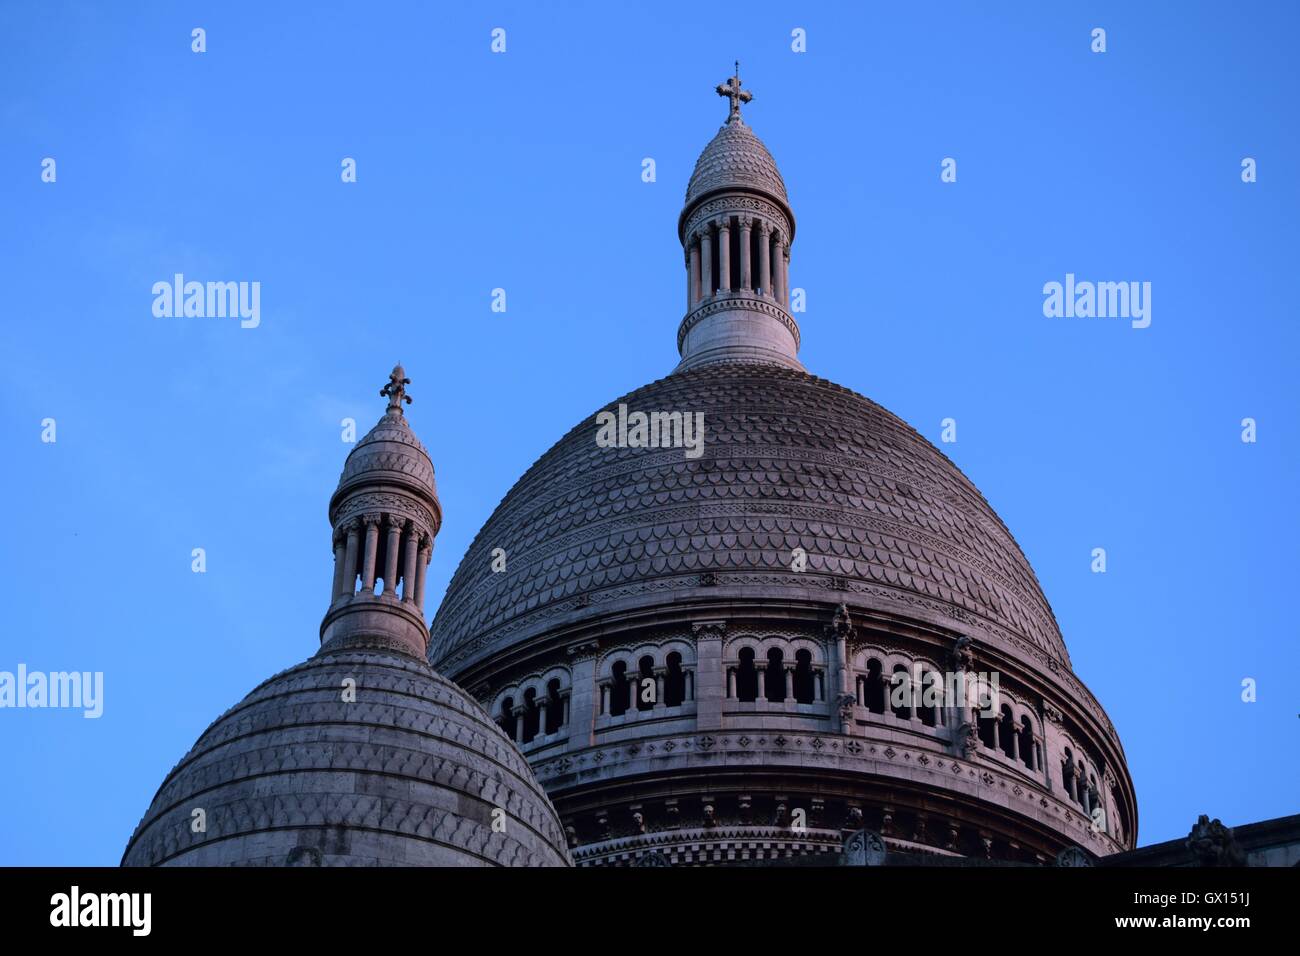 The two main domes of a cathedral in Paris. Stock Photo